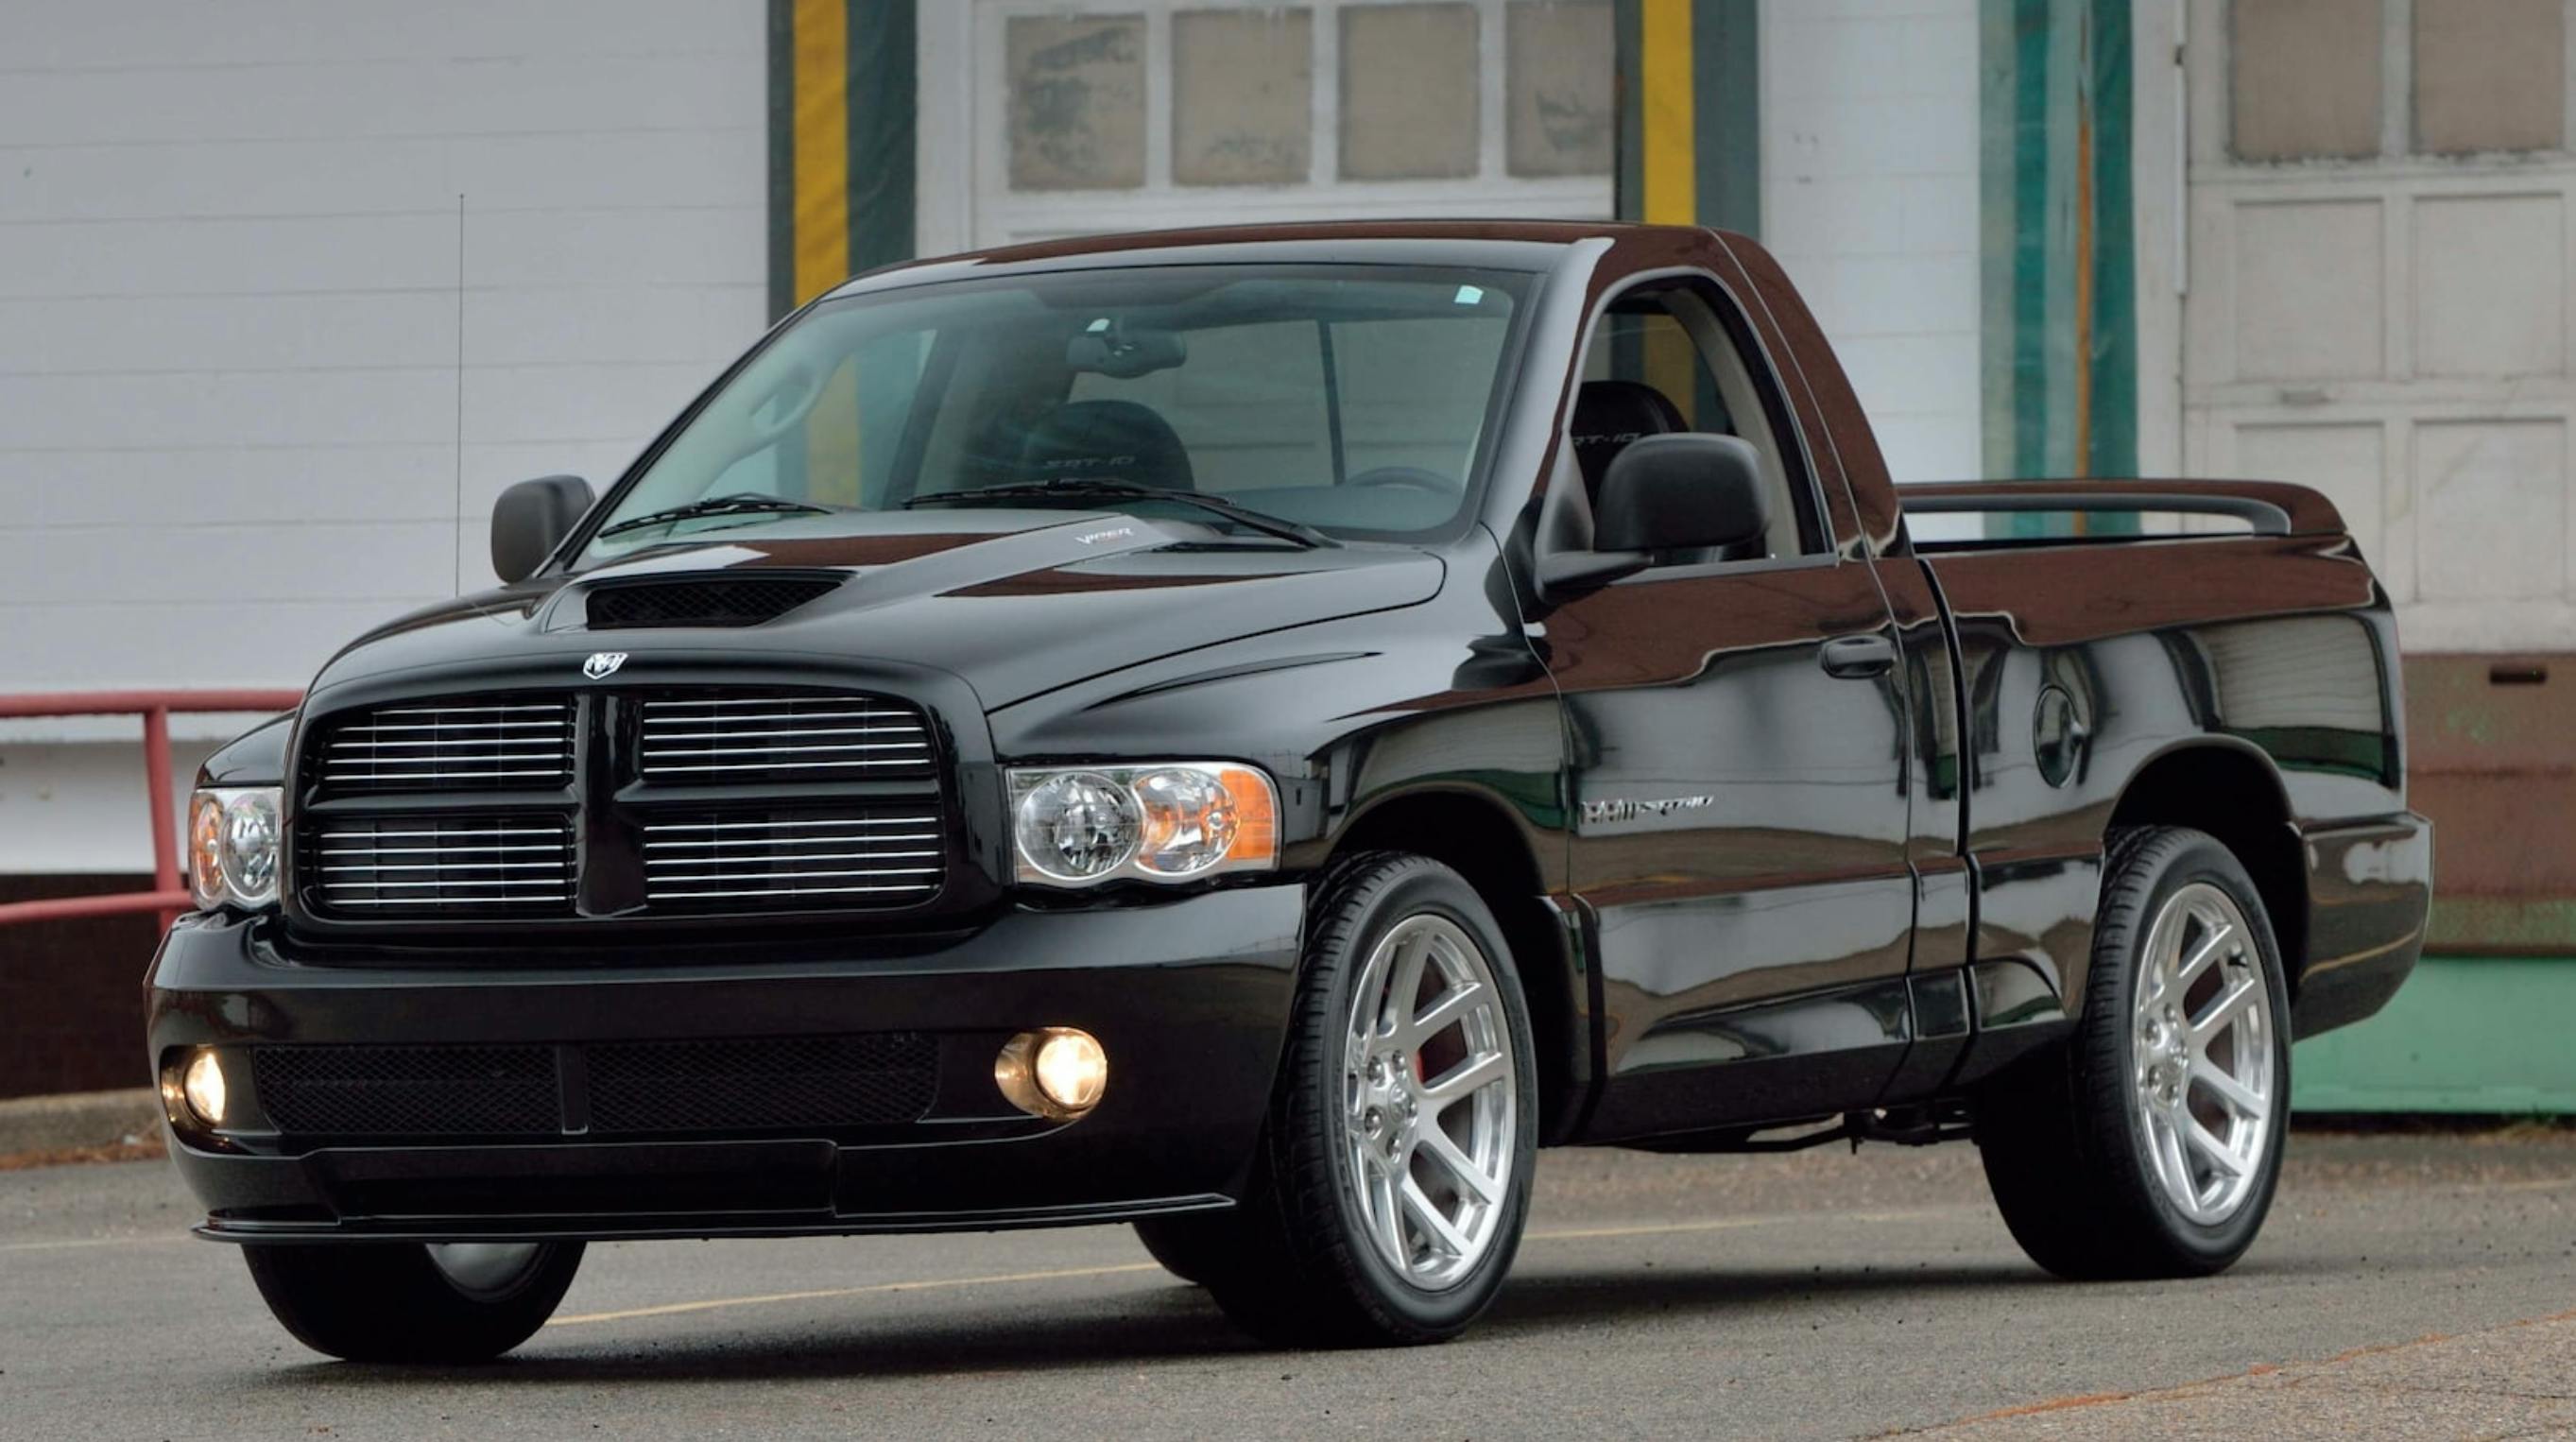 klippe Labe Enlighten Dodge's Viper-powered muscle truck is finally striking the collector market  - Hagerty Media